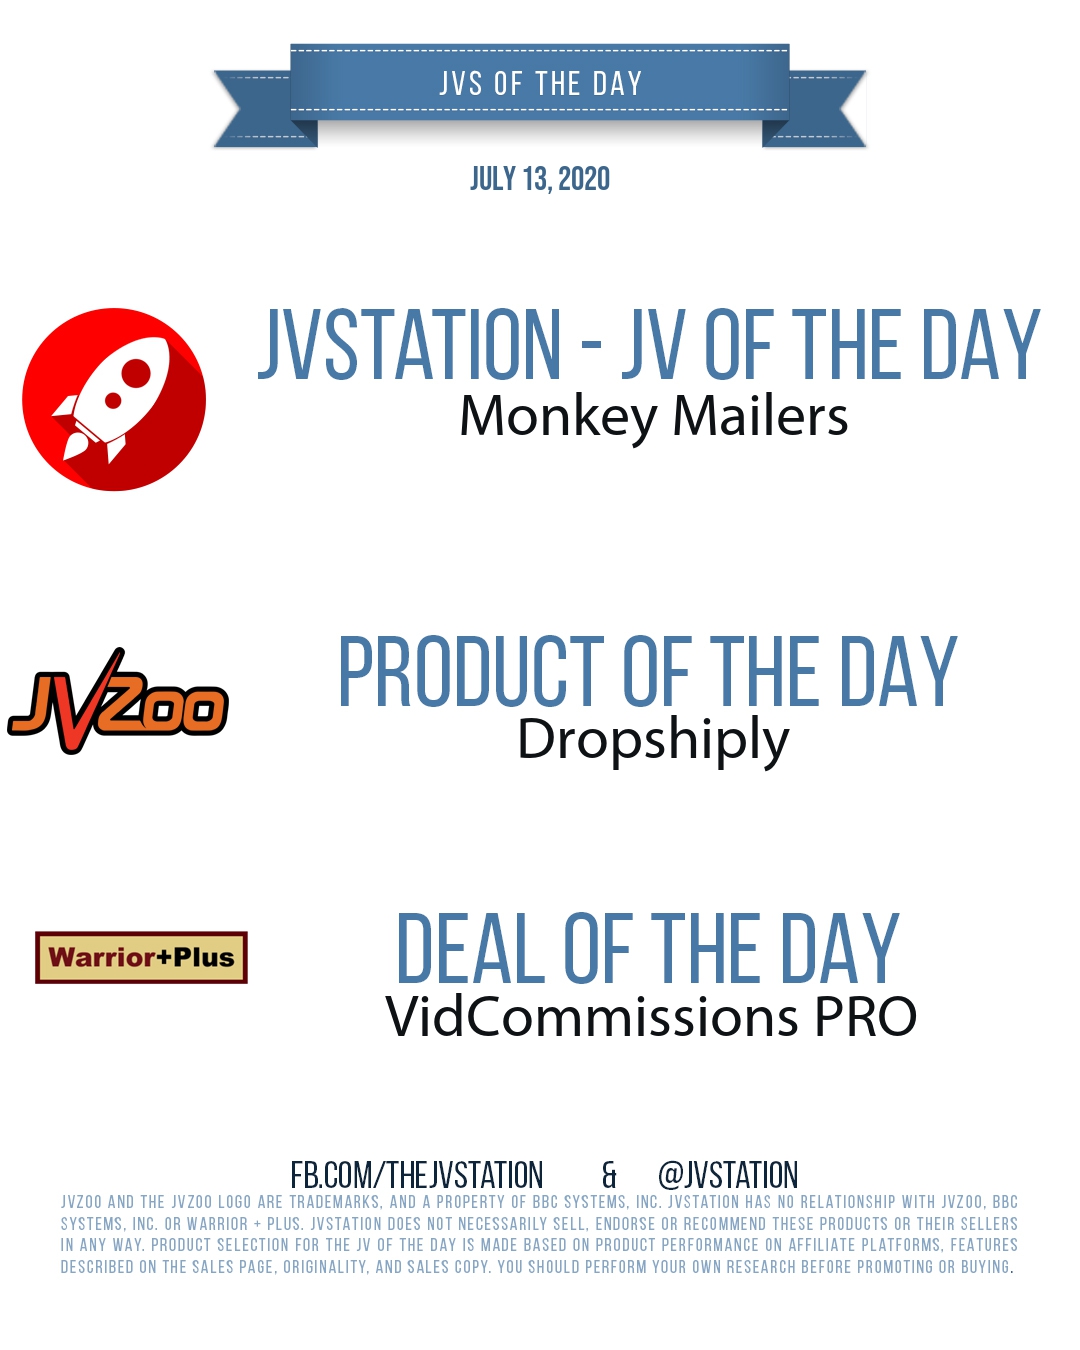 JVs of the day - July 13, 2020